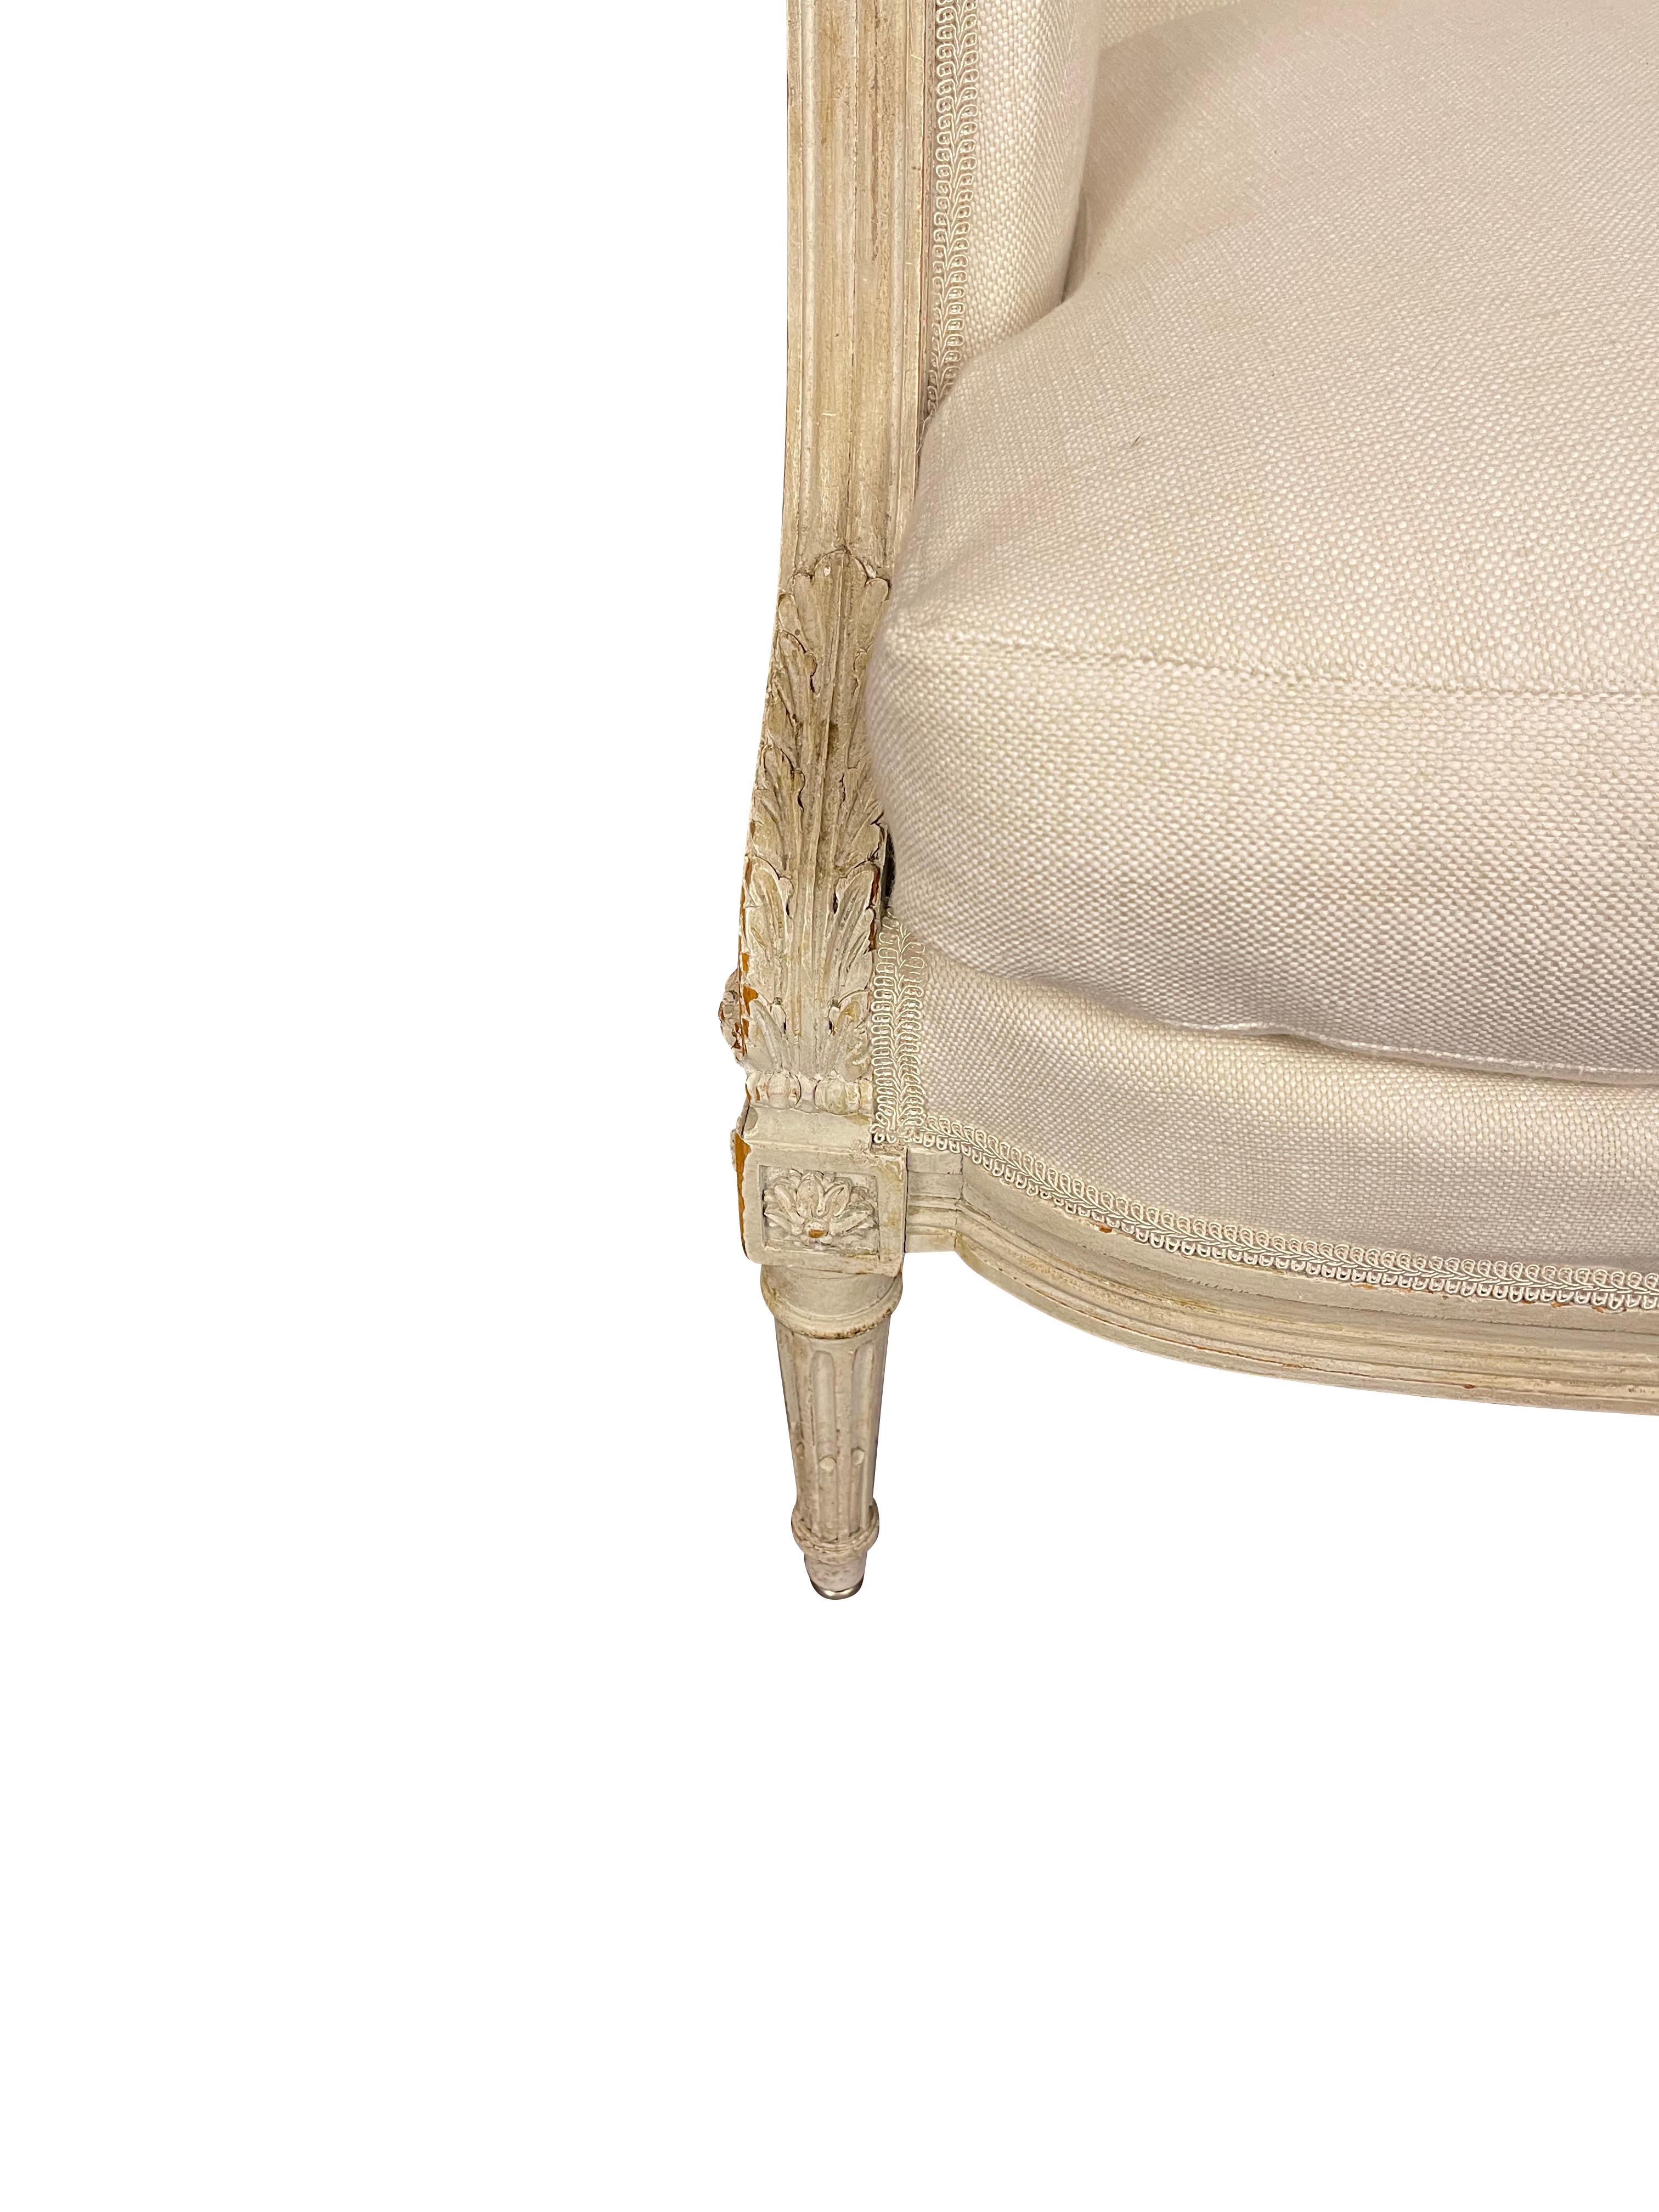 American Louis XVI Style Bergere Chair with Linen 